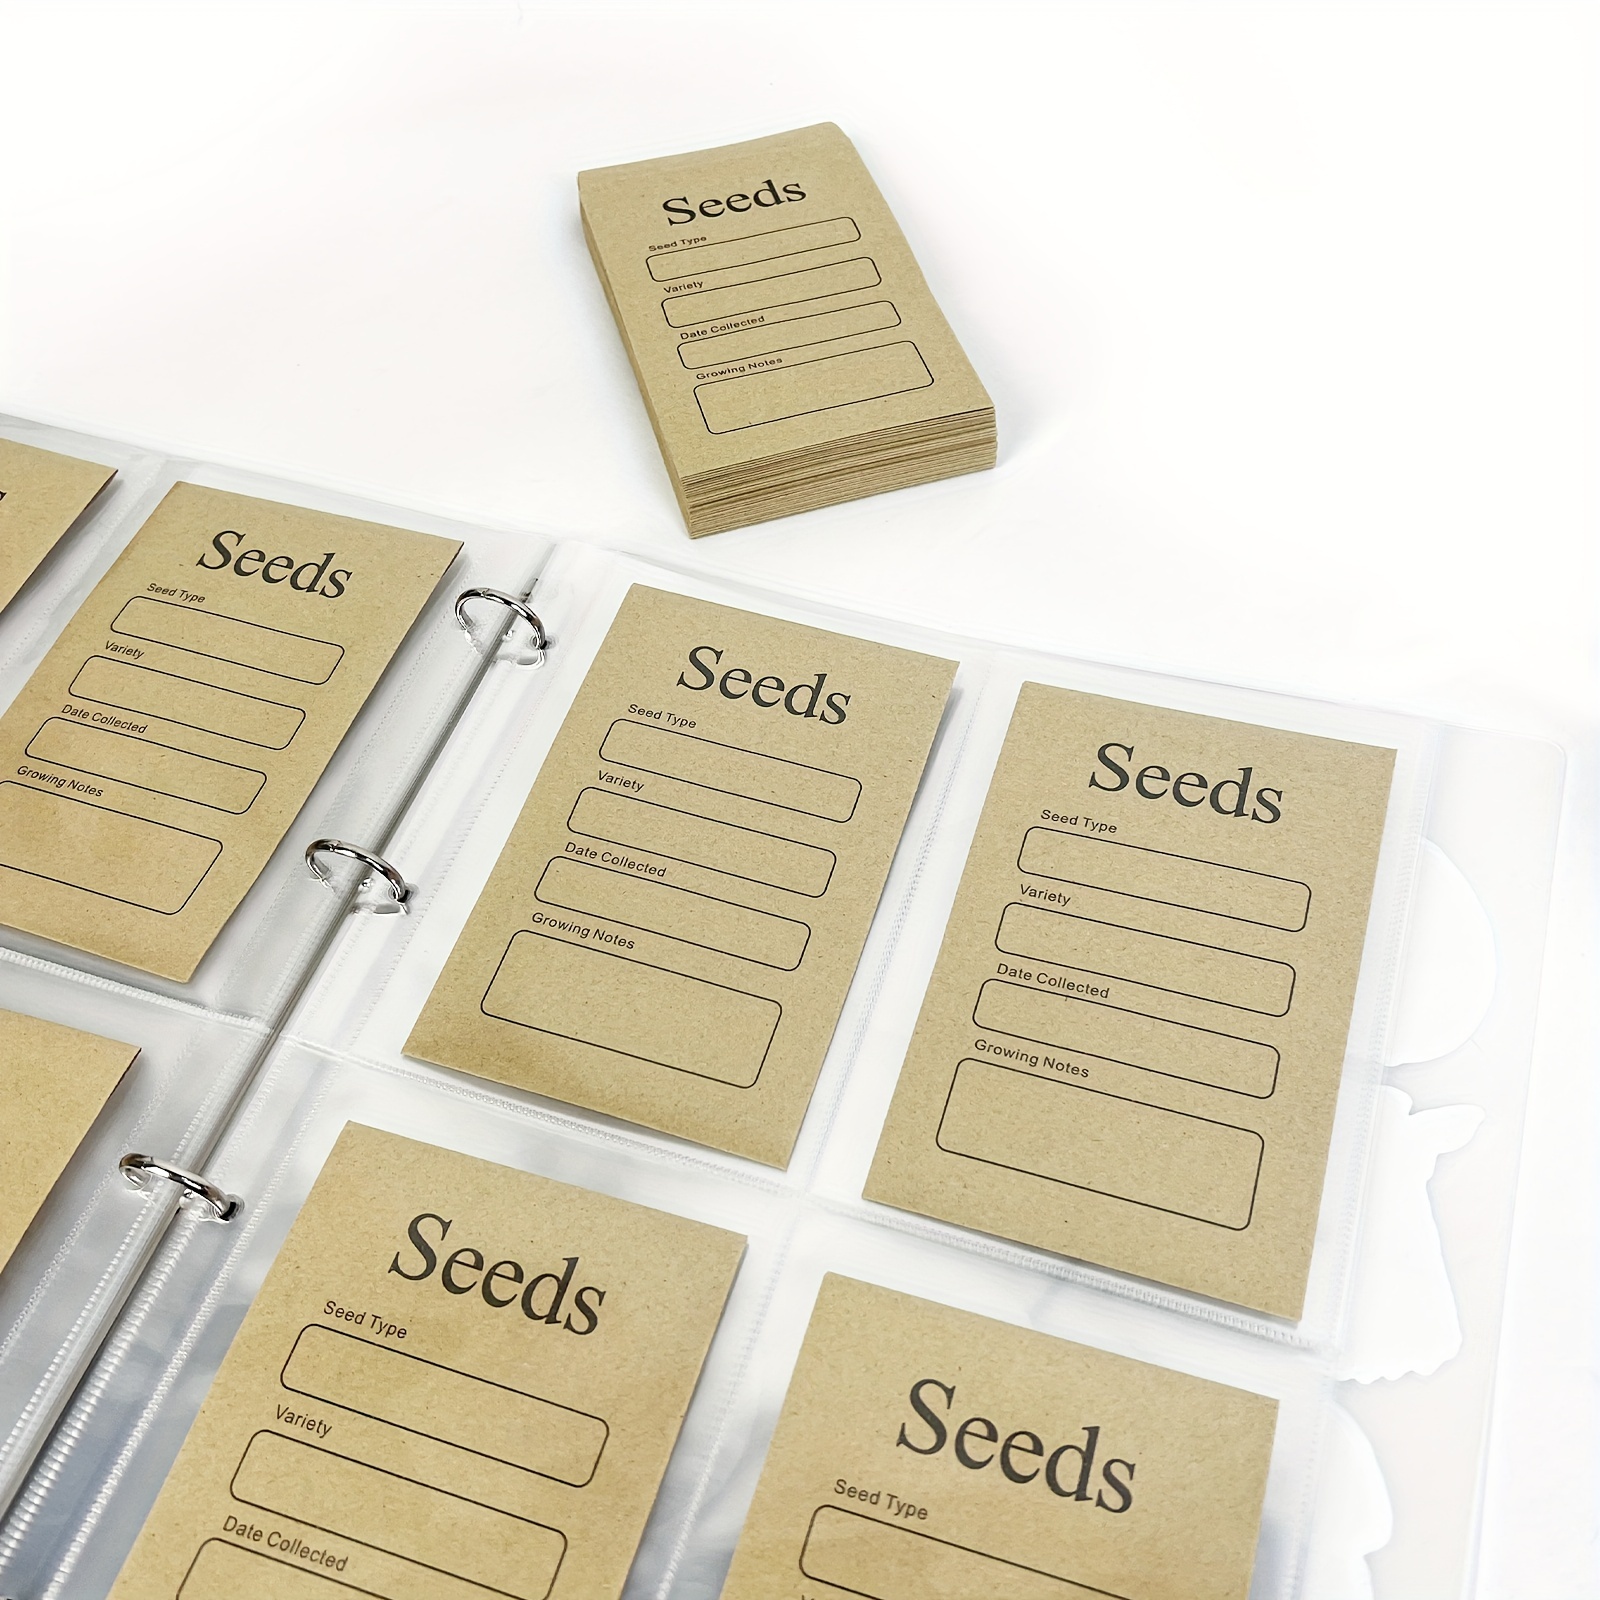 Seedy storage: How to store your vegetable seeds - little eco footprints